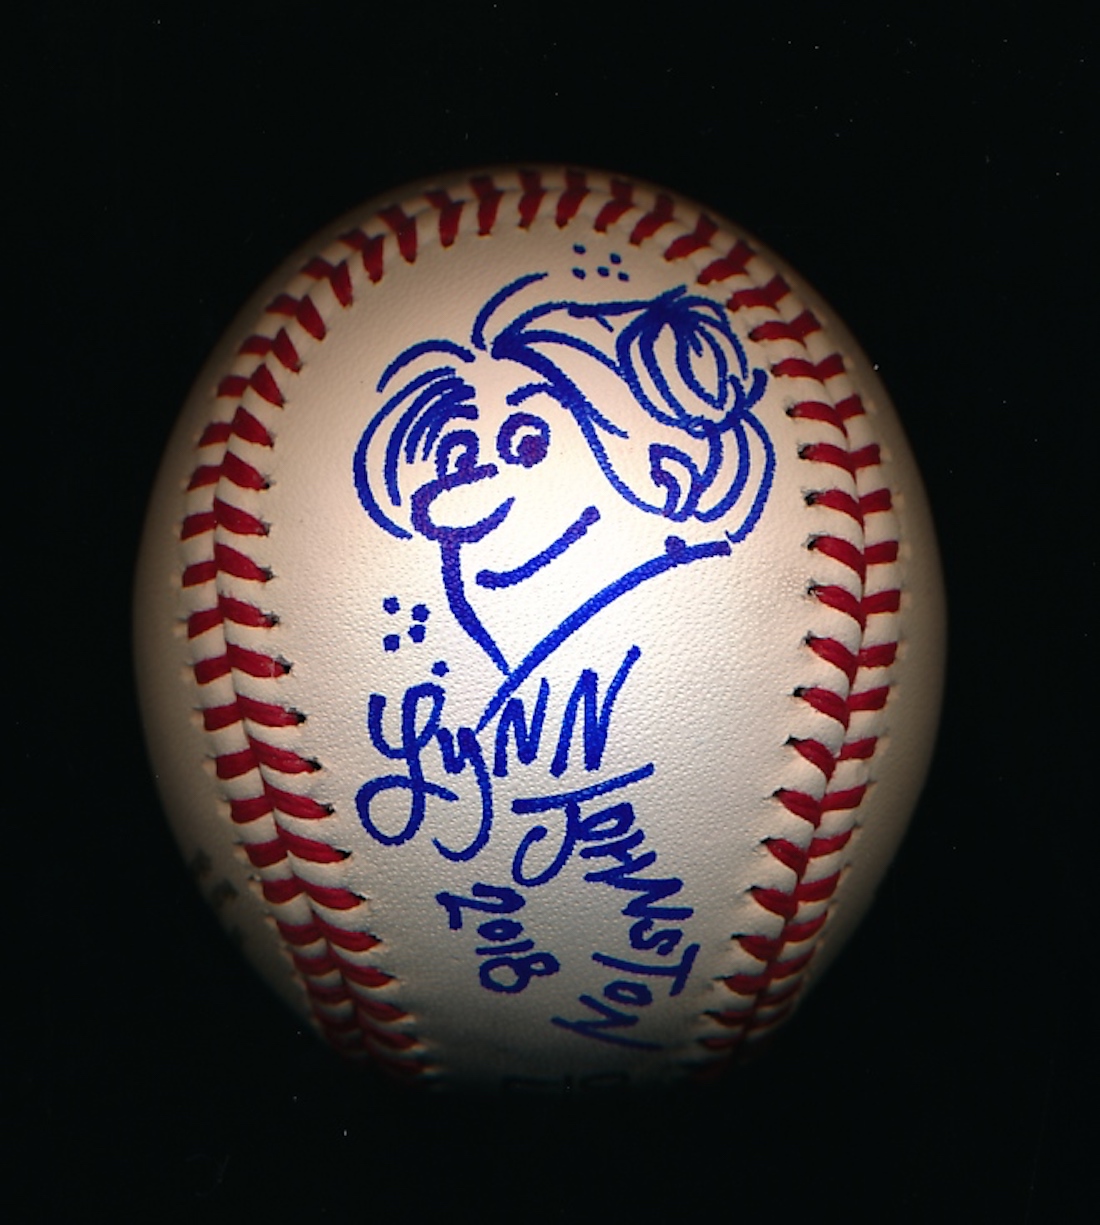 A scanned image of a baseball autographed with illustration by For Better or For Worse cartoonist Lynn Johnston, from the collection of projectionist Bruce Bartoo